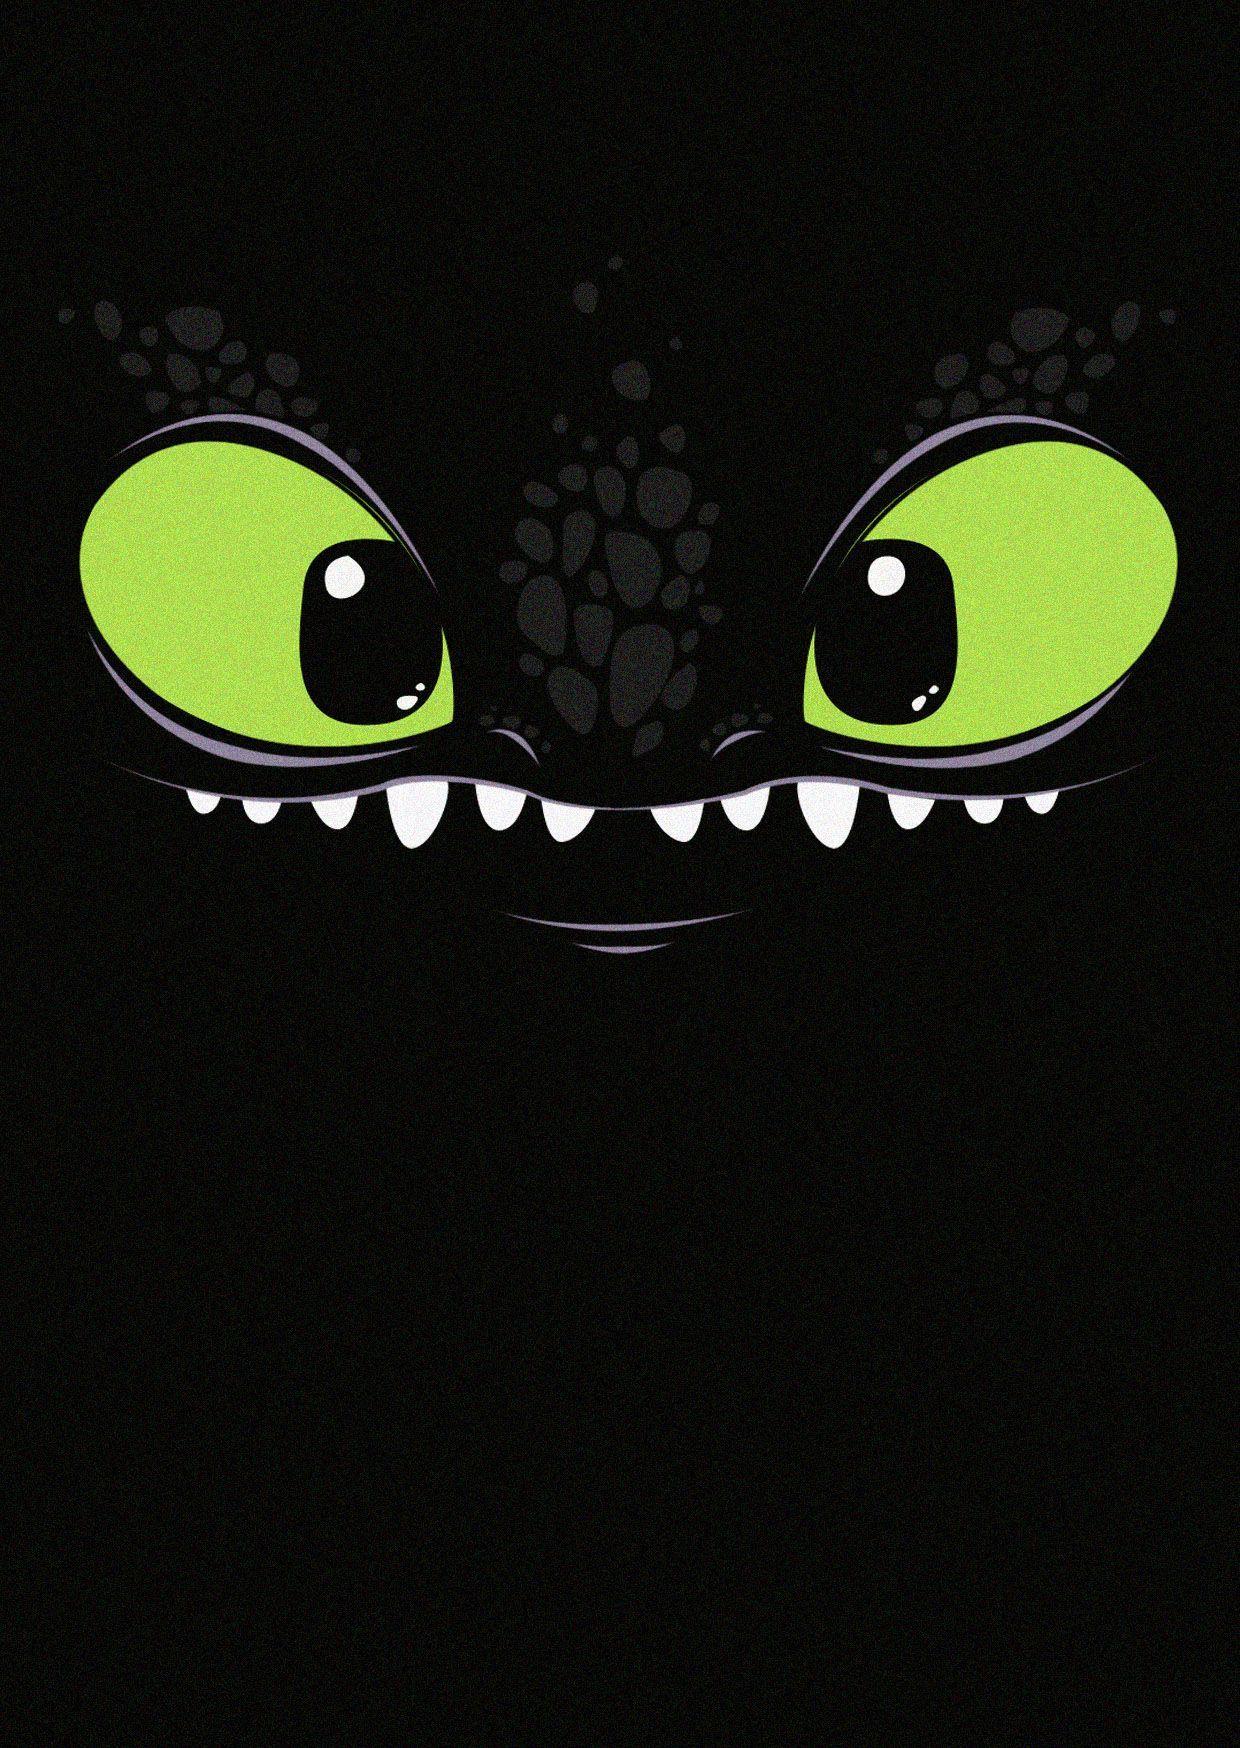 Toothless (How To Train Your Dragon) T Shirt. Check It